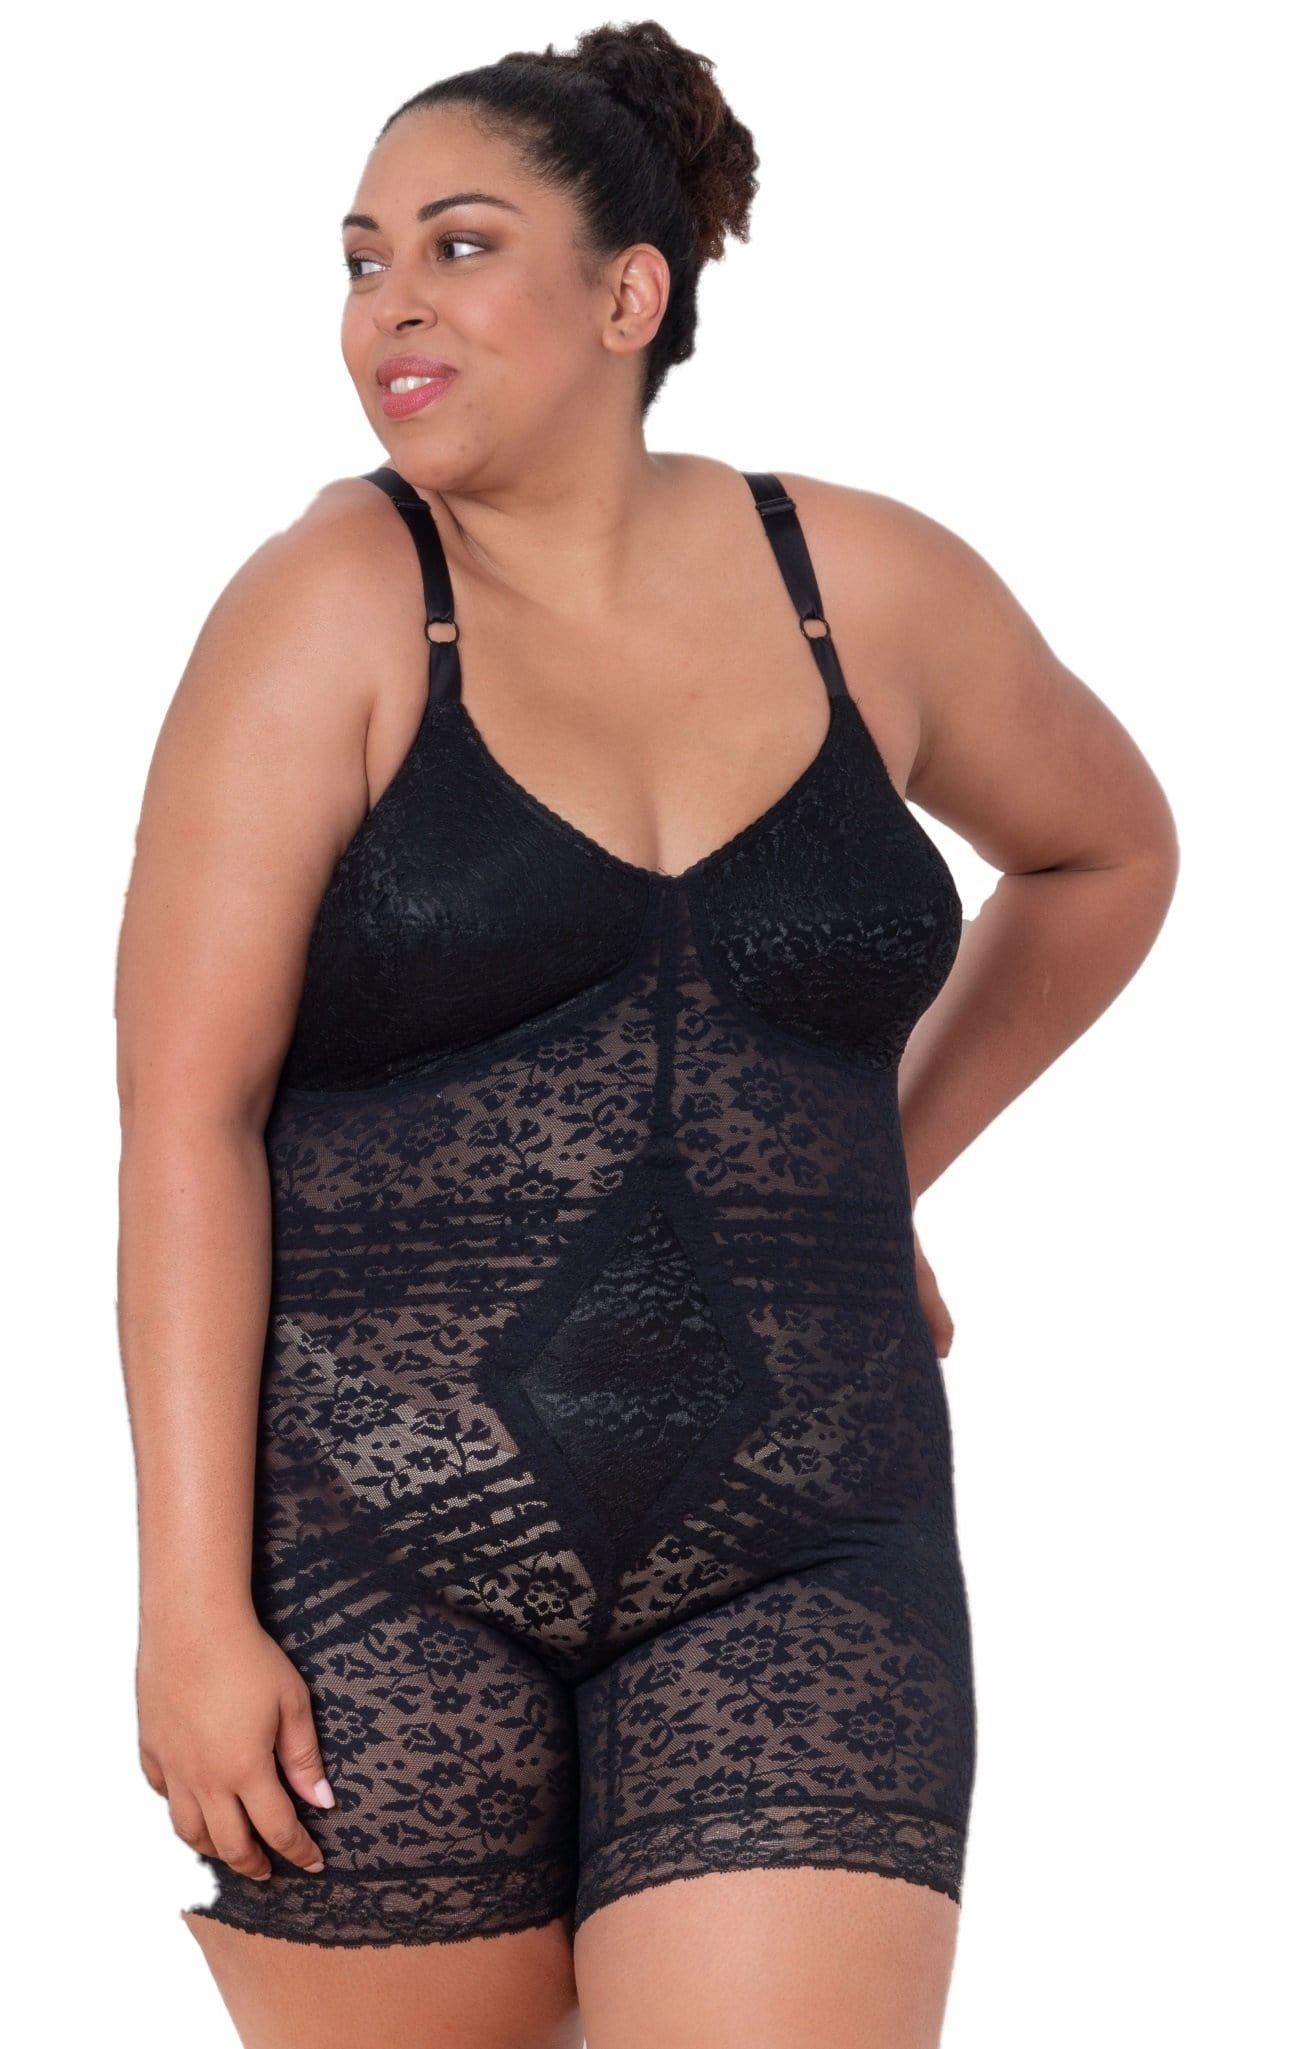 Extra Firm Black and Pink Body Shaper/Briefer